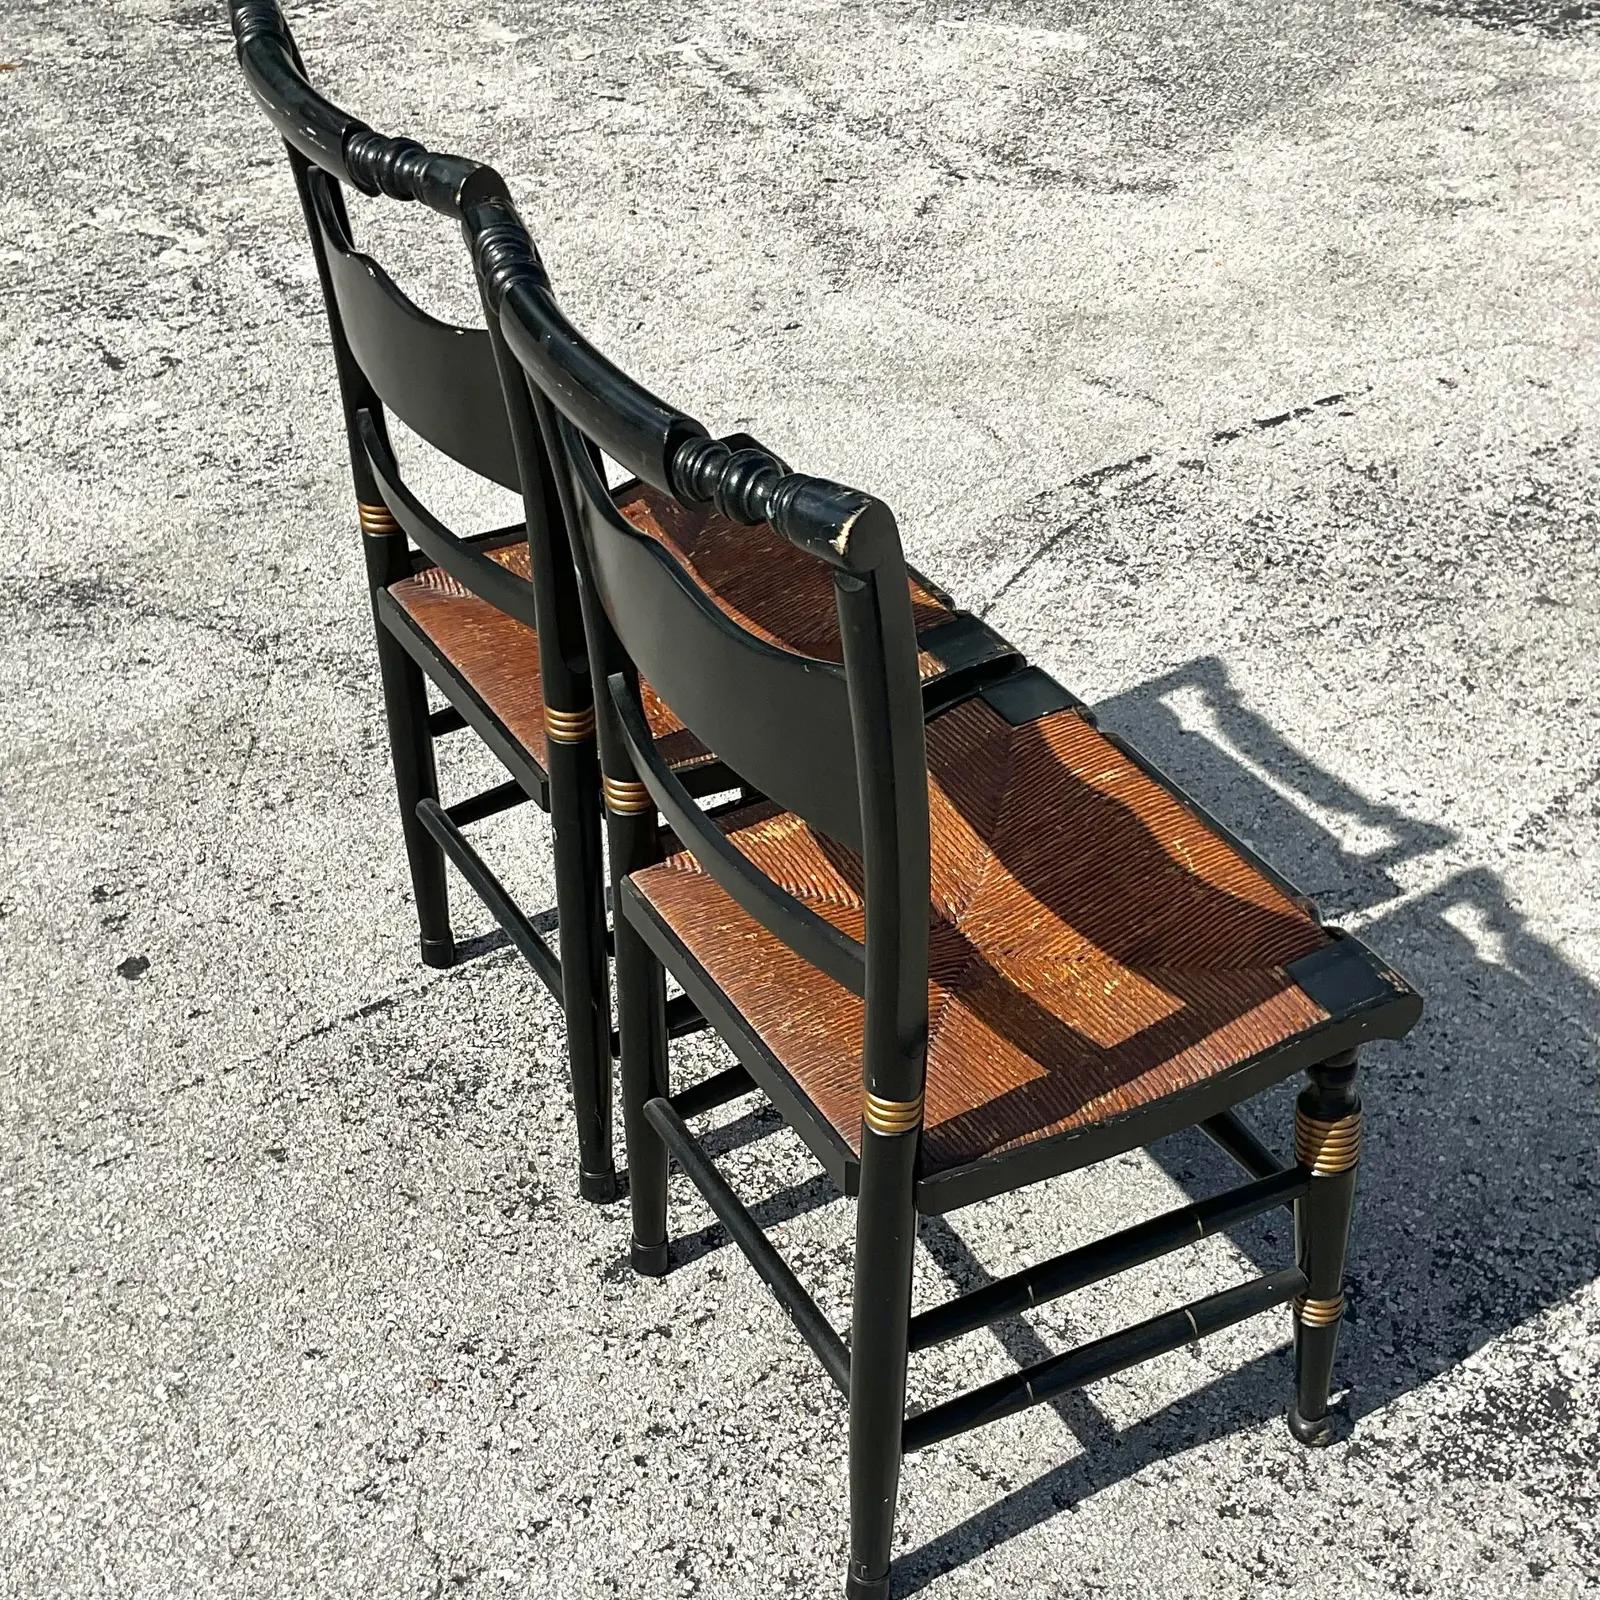 A fantastic pair of vintage Boho dining chairs. Thr iconic Hitchcock style with beautiful hand painted detail. Vintage rush seats with beautiful patina. Acquired from a Palm Beach estate.